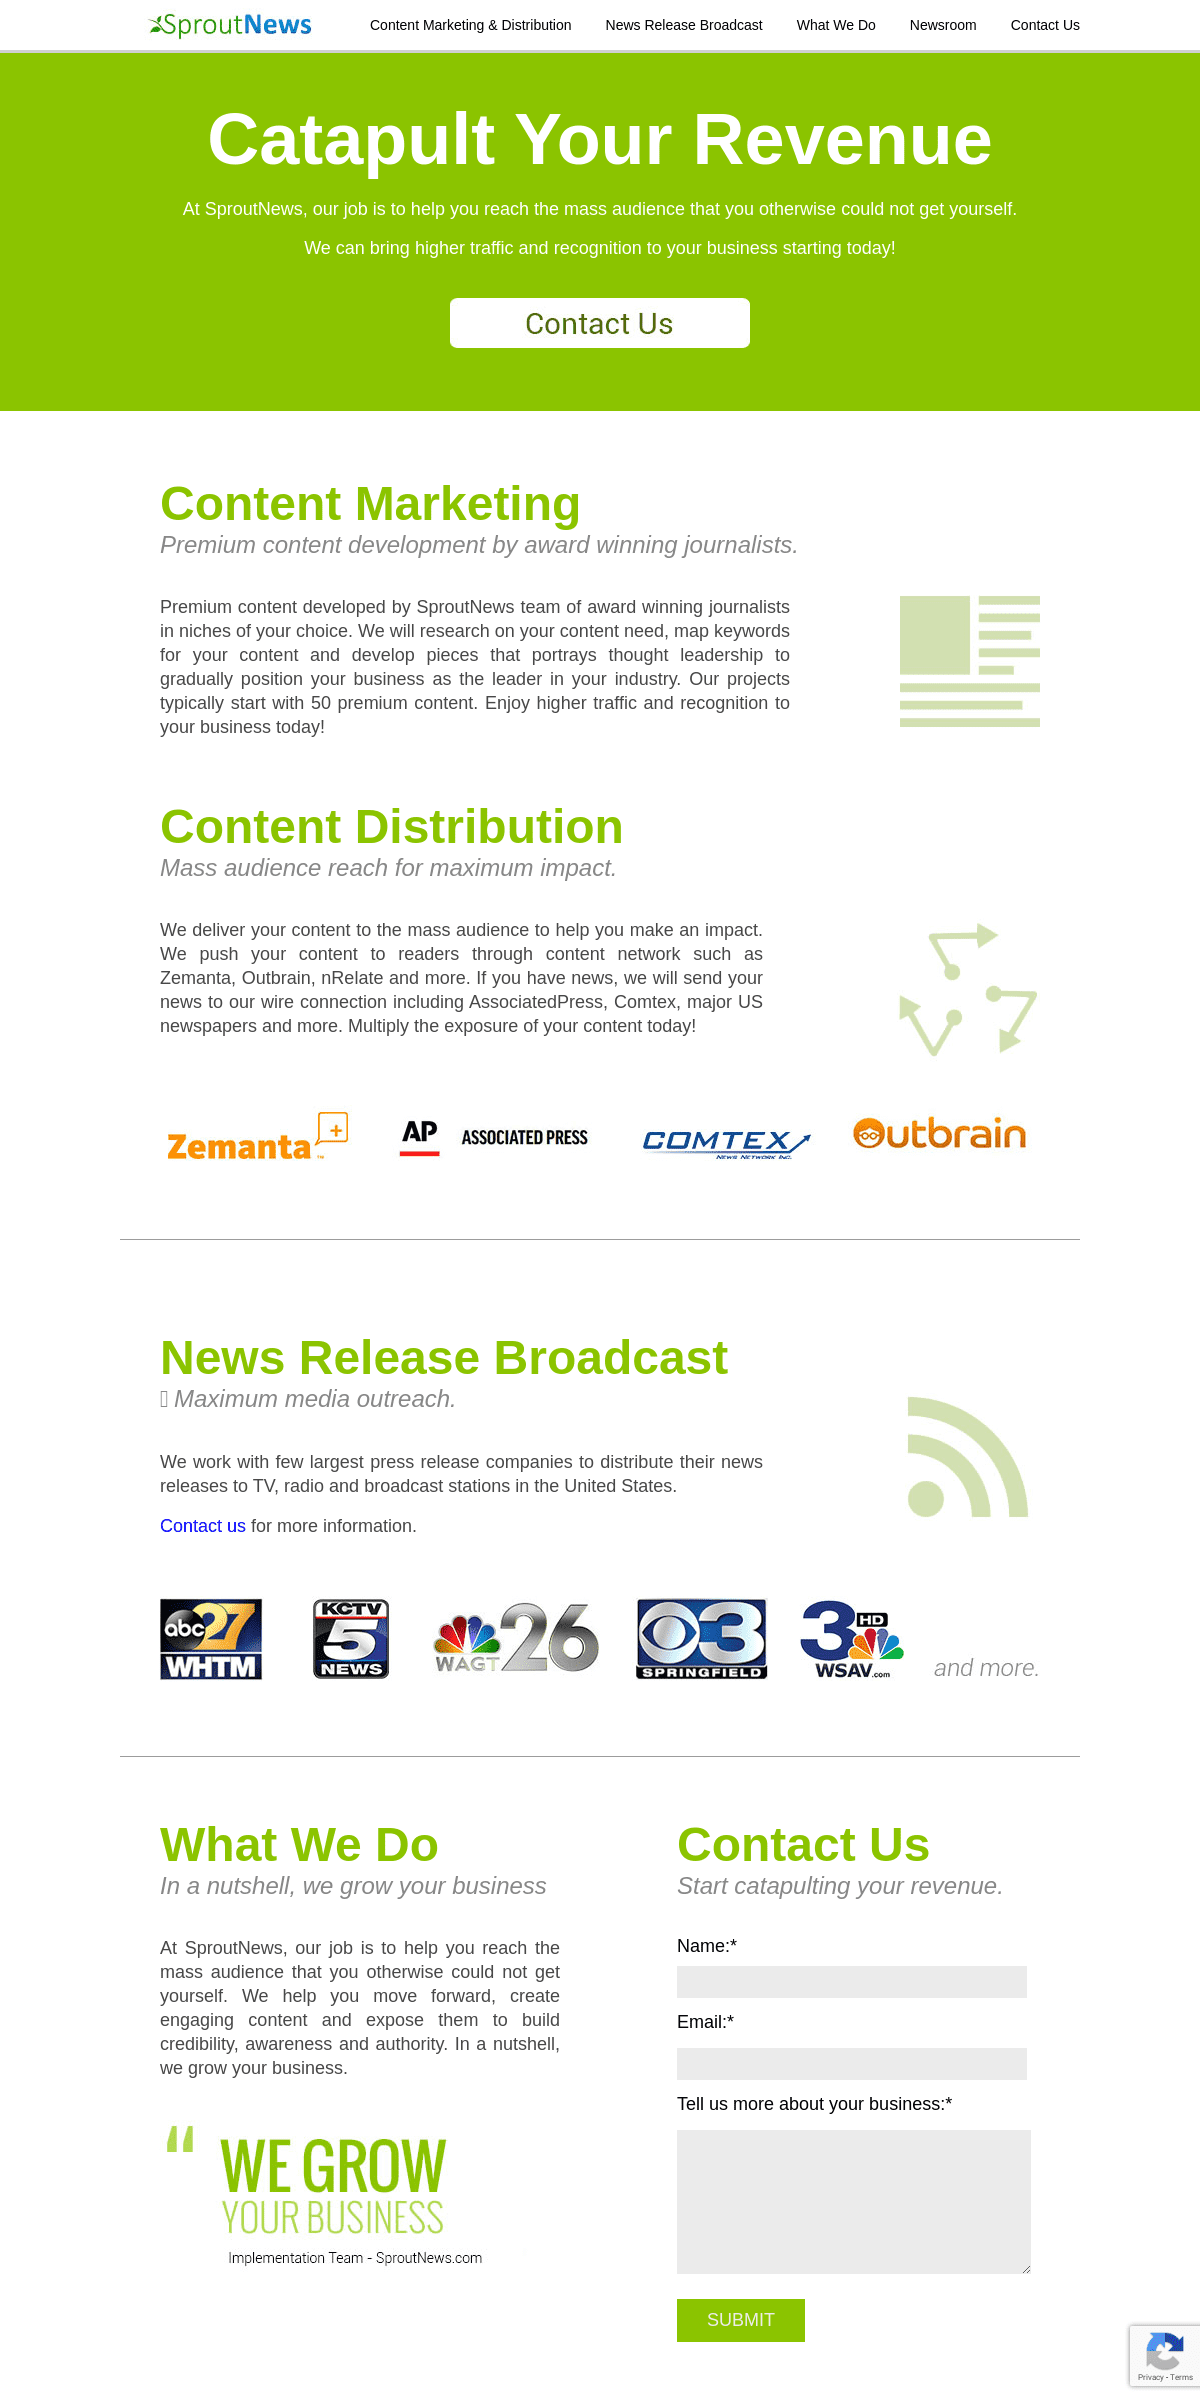 A complete backup of sproutnews.com